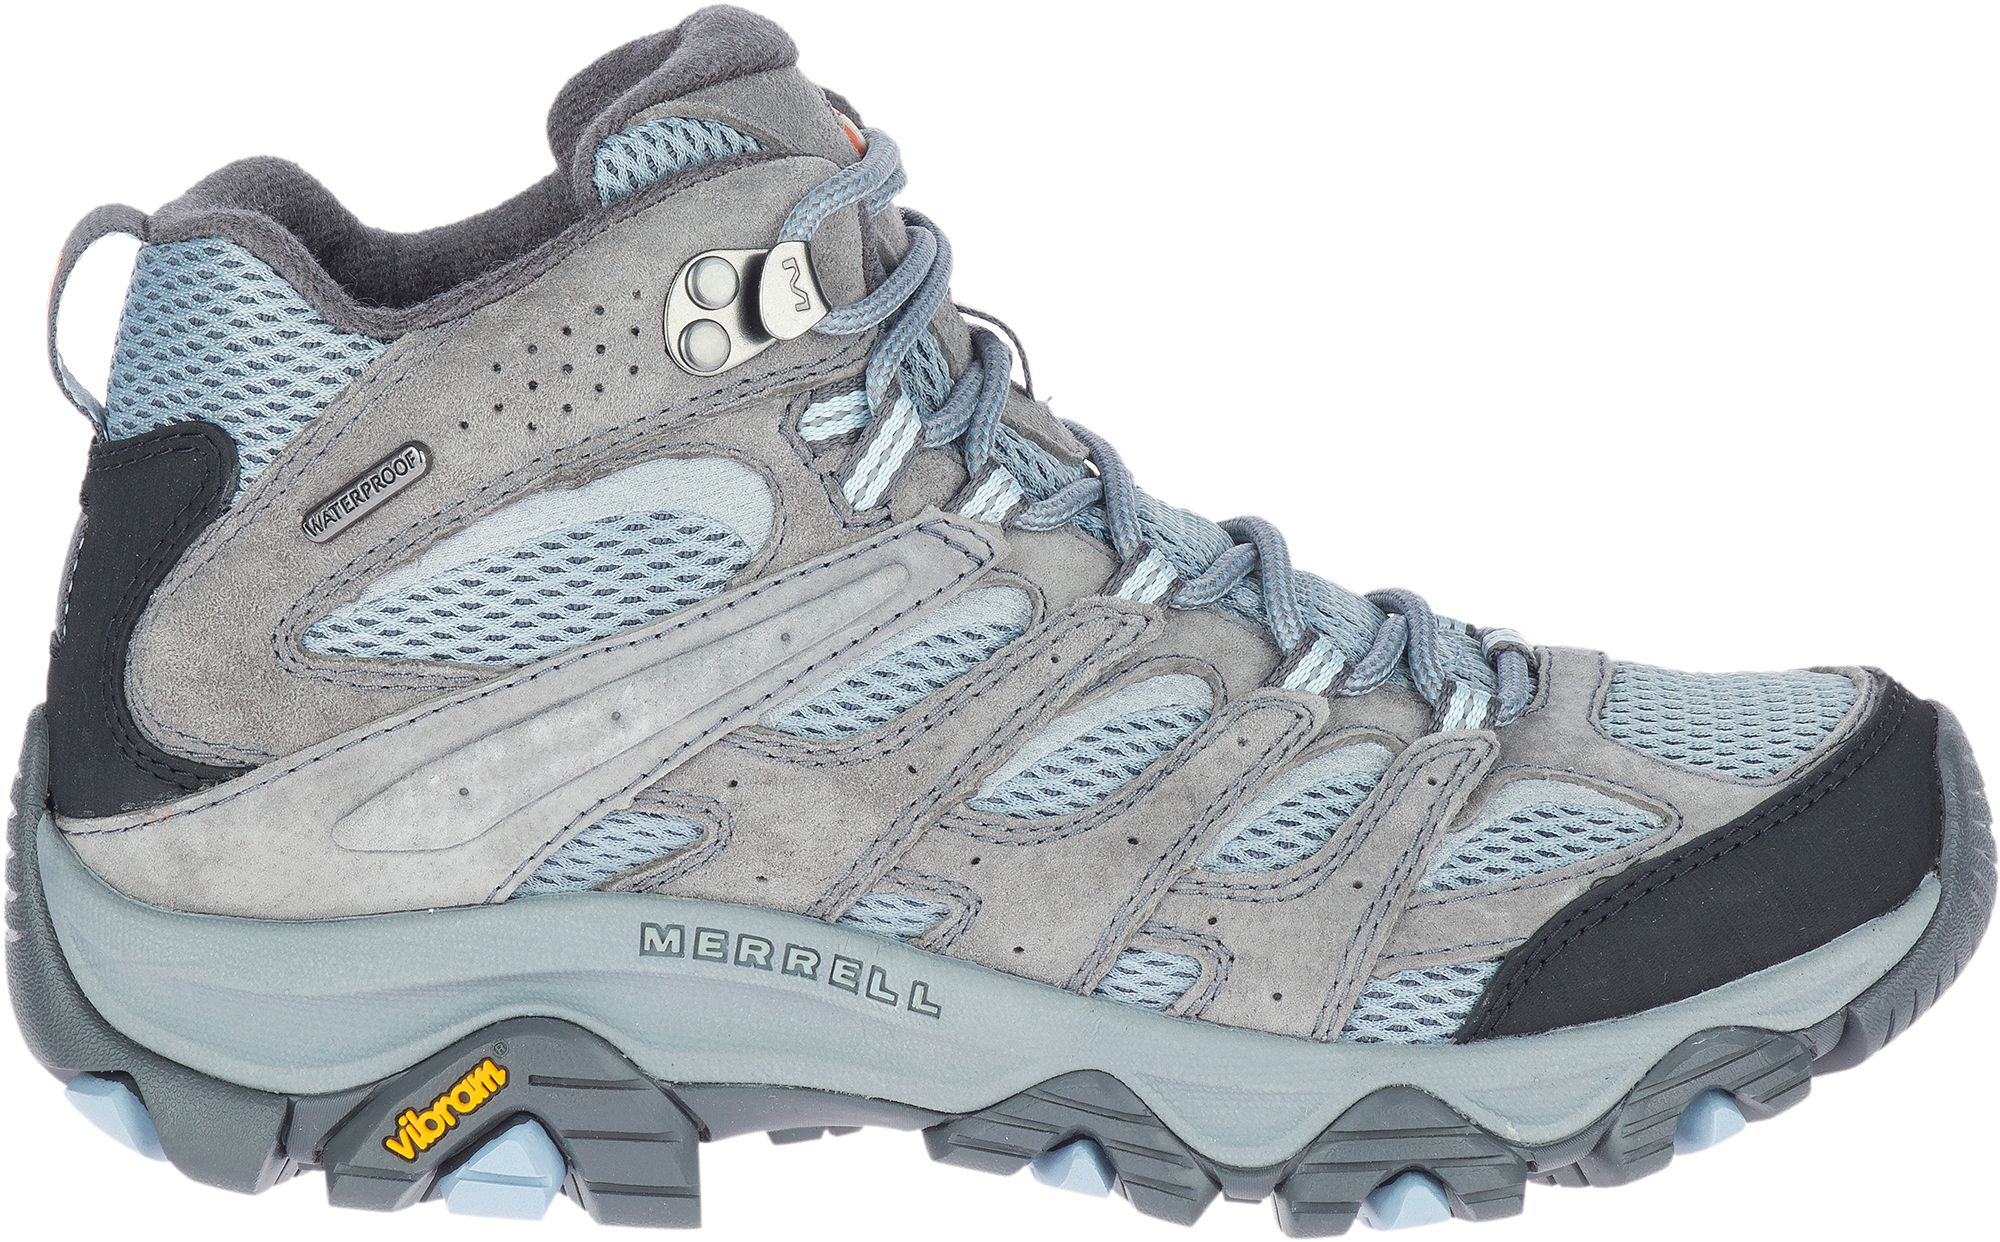 Photos - Trekking Shoes MERRELL Women's Moab 3 Mid Waterproof Hiking Boots, Size 8, Altitude Blue 